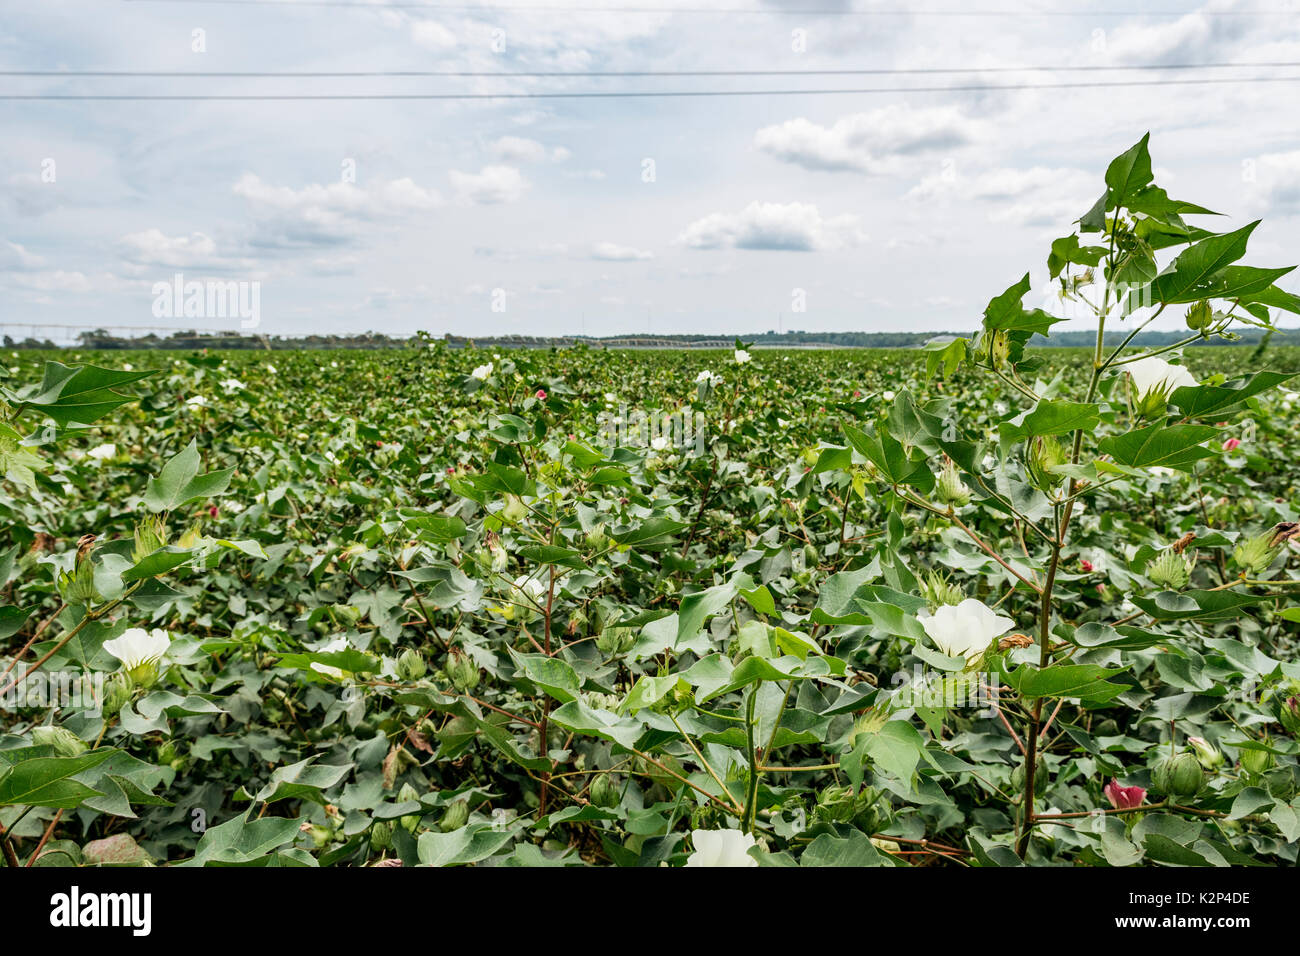 Large cotton farm in central Alabama, USA, at mid season peak showing healthy growth, or high cotton. The cotton plants are in full bloom. Stock Photo